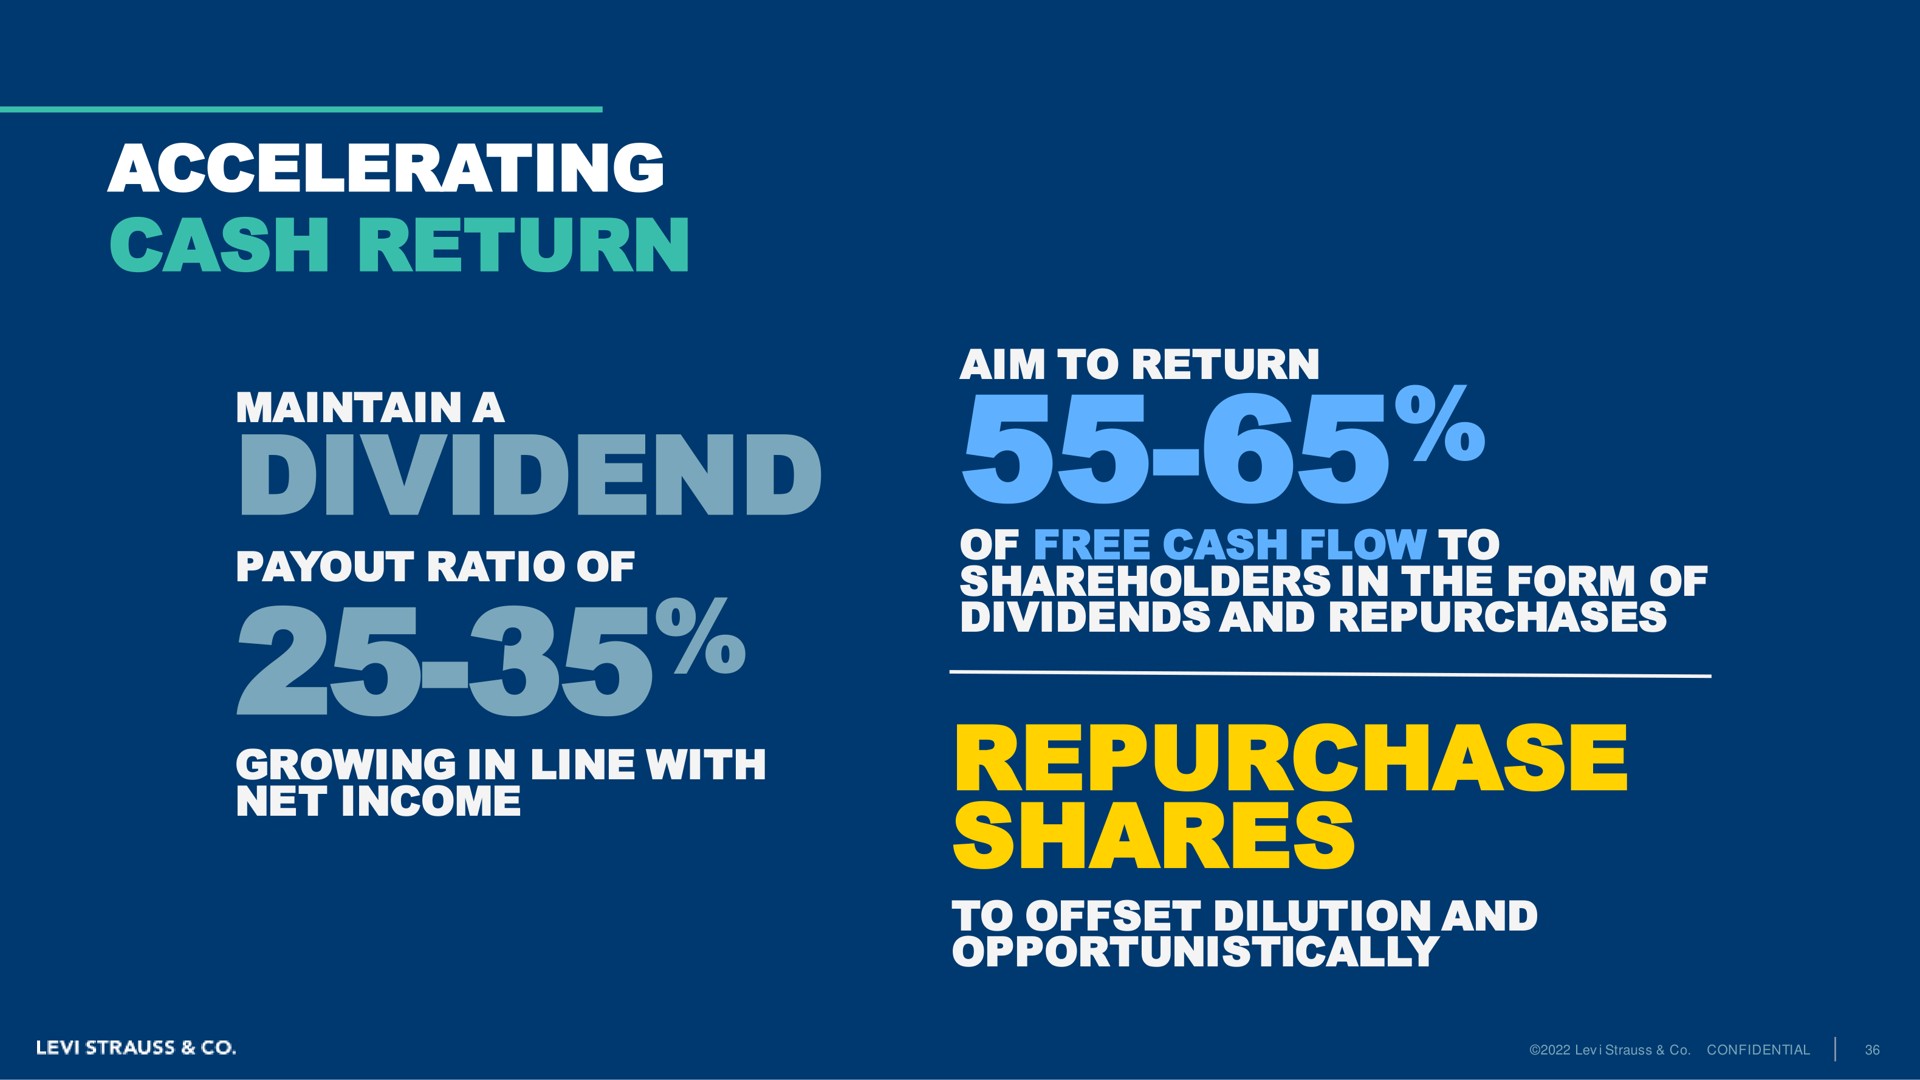 accelerating cash return maintain a ratio of dividend growing in line with net income aim to return of free cash flow to shareholders in the form of dividends and repurchases repurchase shares to offset dilution and opportunistically | Levi Strauss